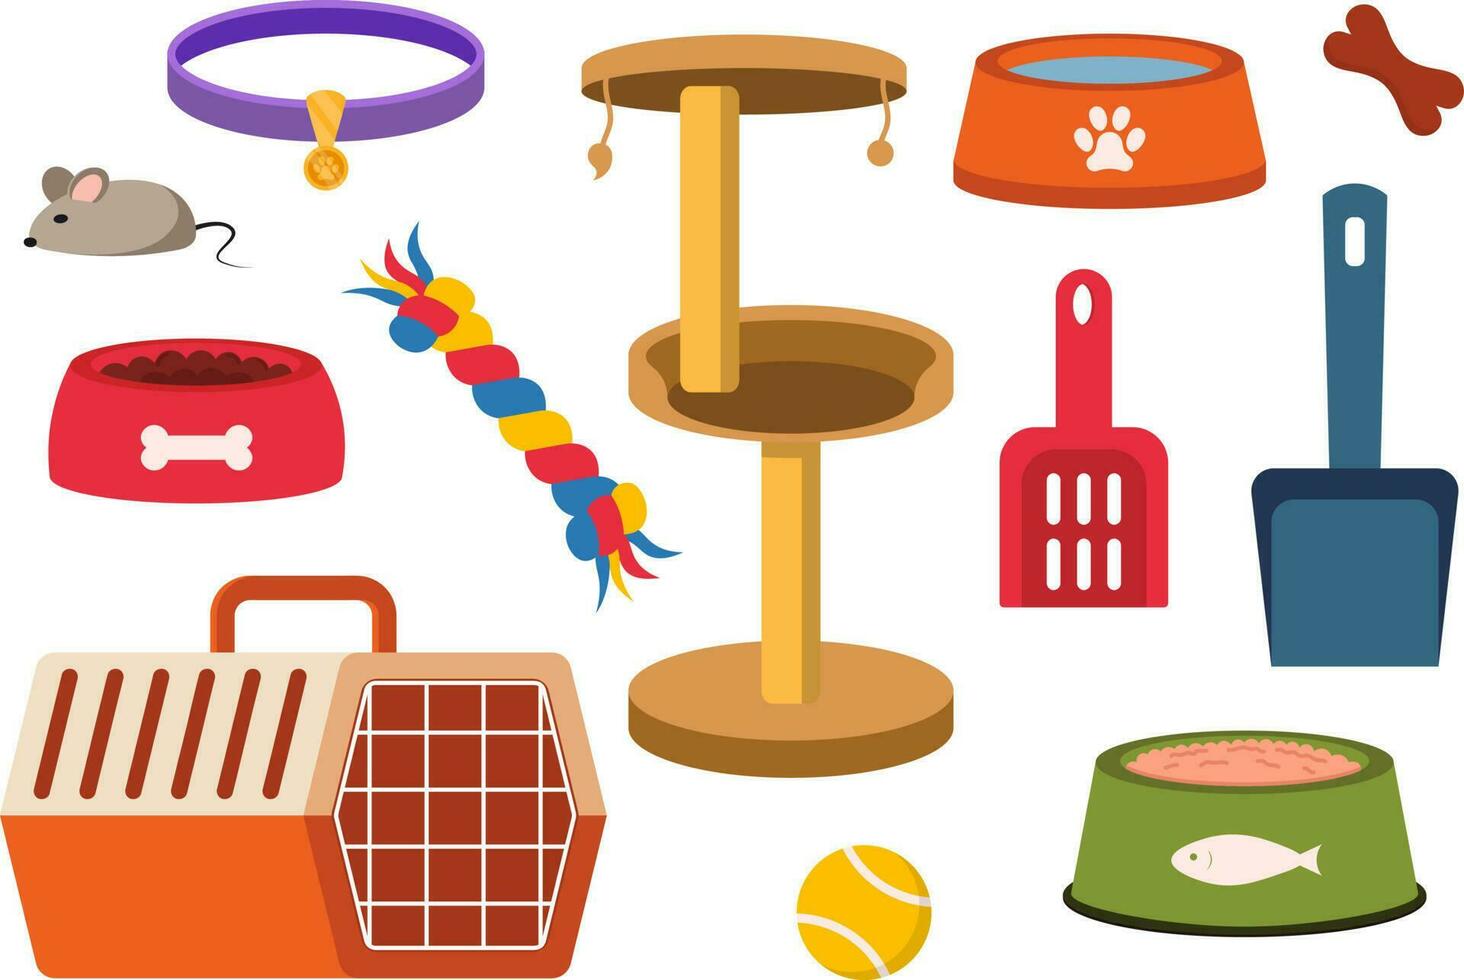 Pet Supplies, Accessories Collection. Vector Illustration In Flat Style